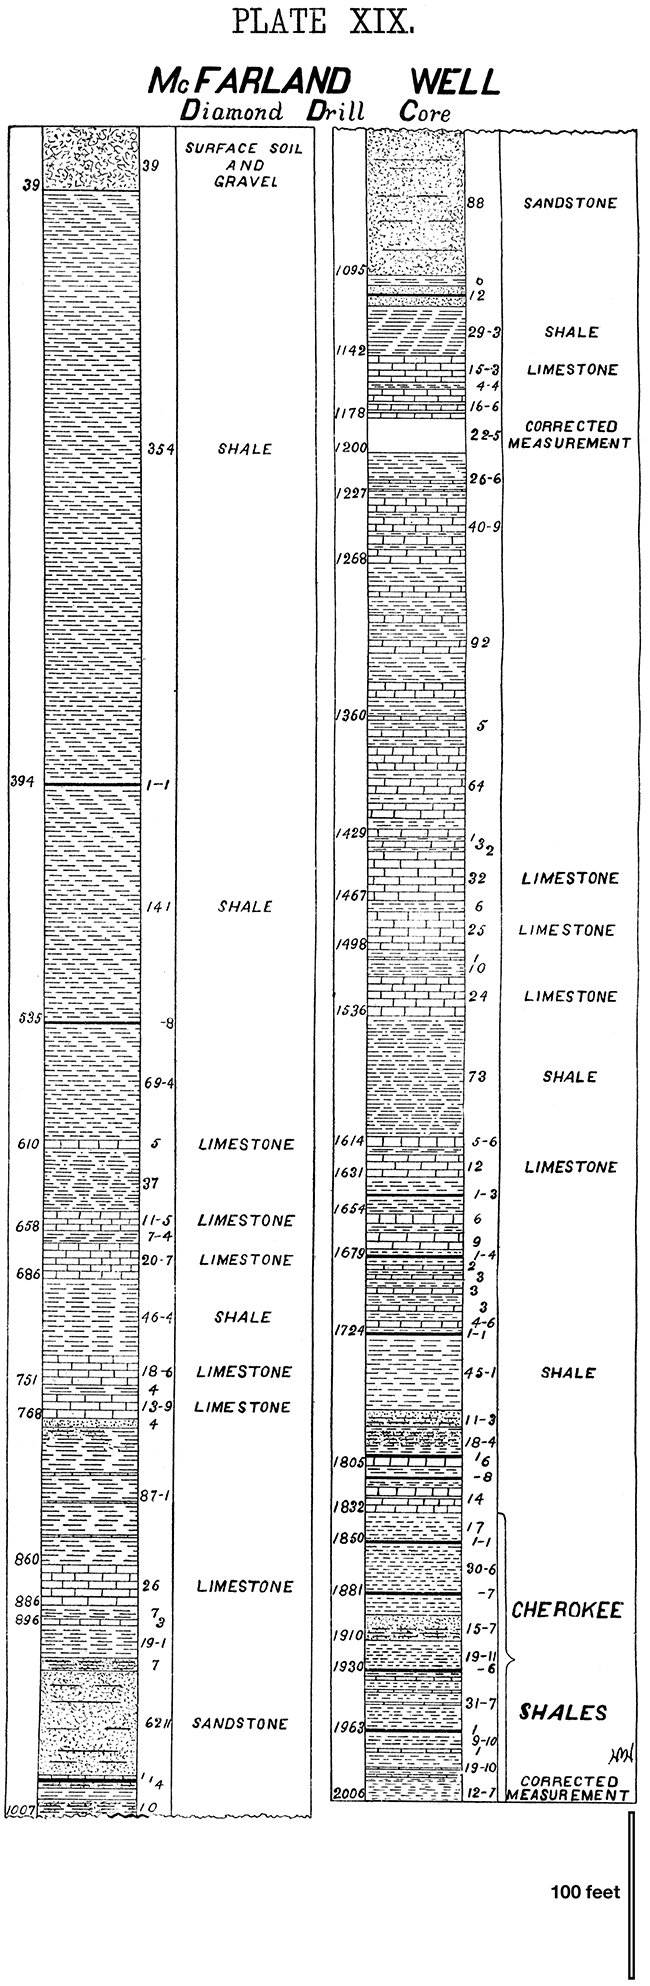 Stratigraphic columns from the McFarland well.